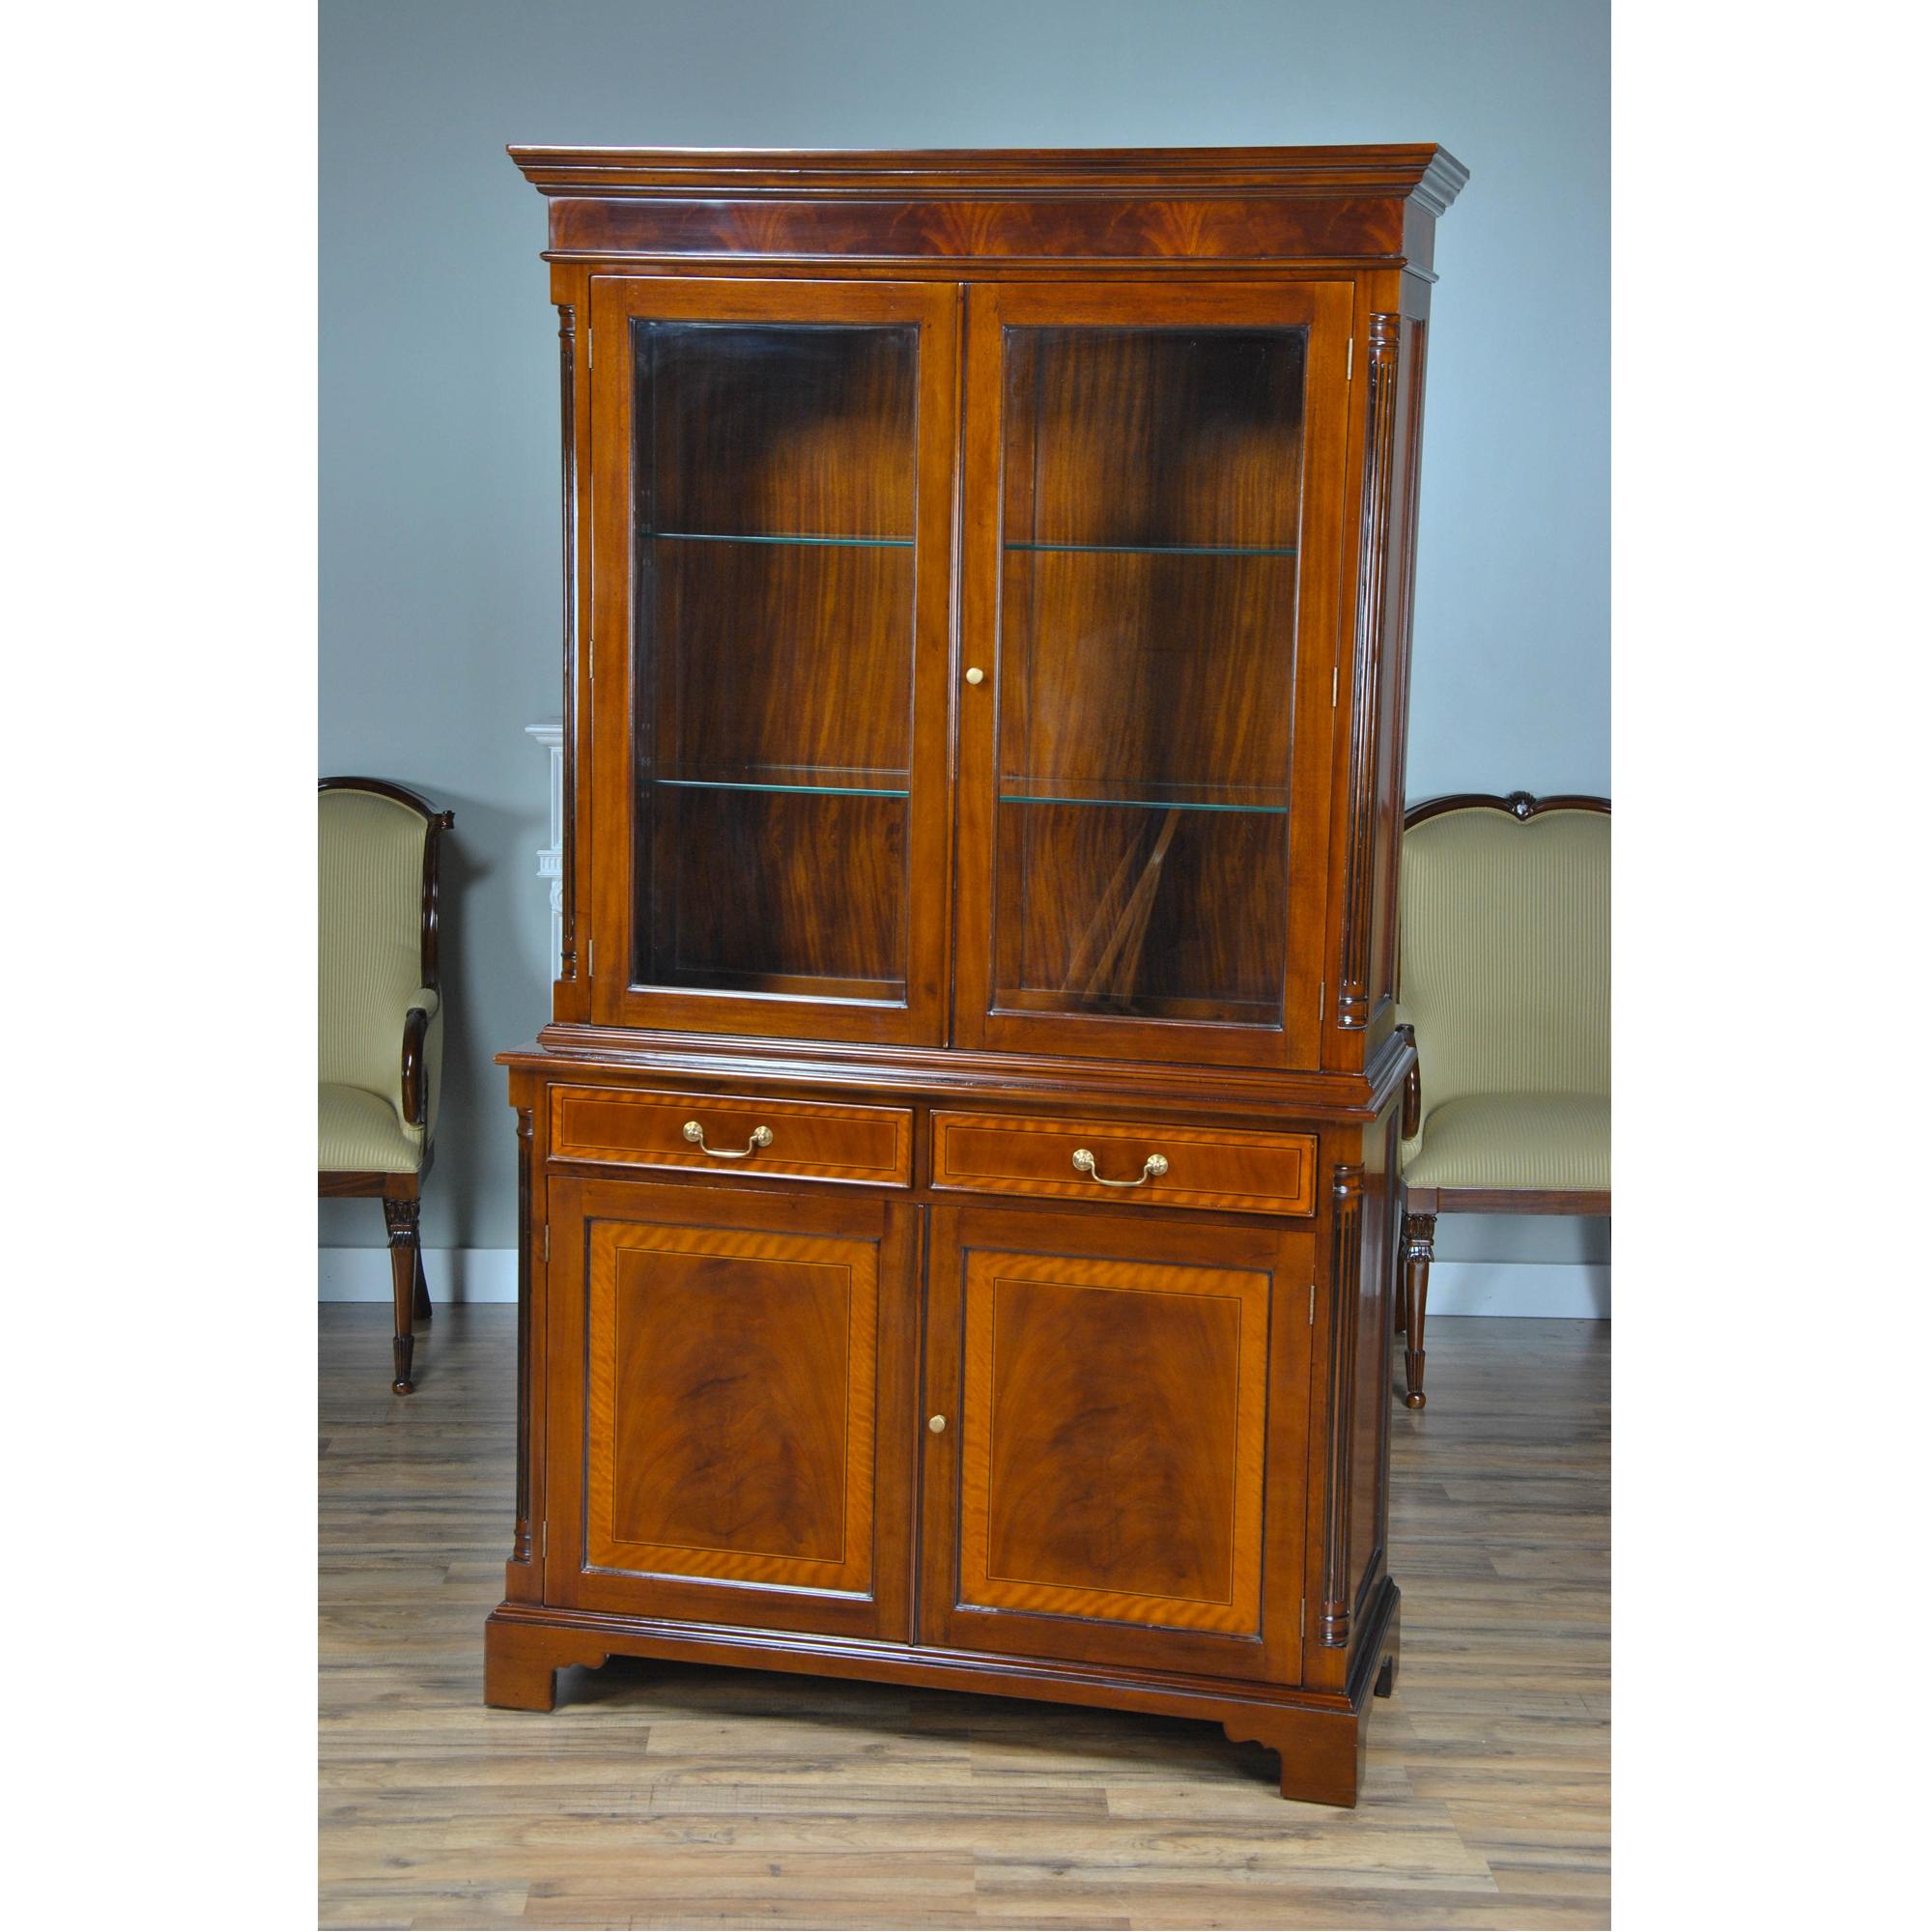 A highly functional and decorative two part Mahogany Tall Bookcase cabinet resting on shaped bracket feet. Large doors without lattice work allow for full presentation of your decorative items while glass shelves in the top section allow for light